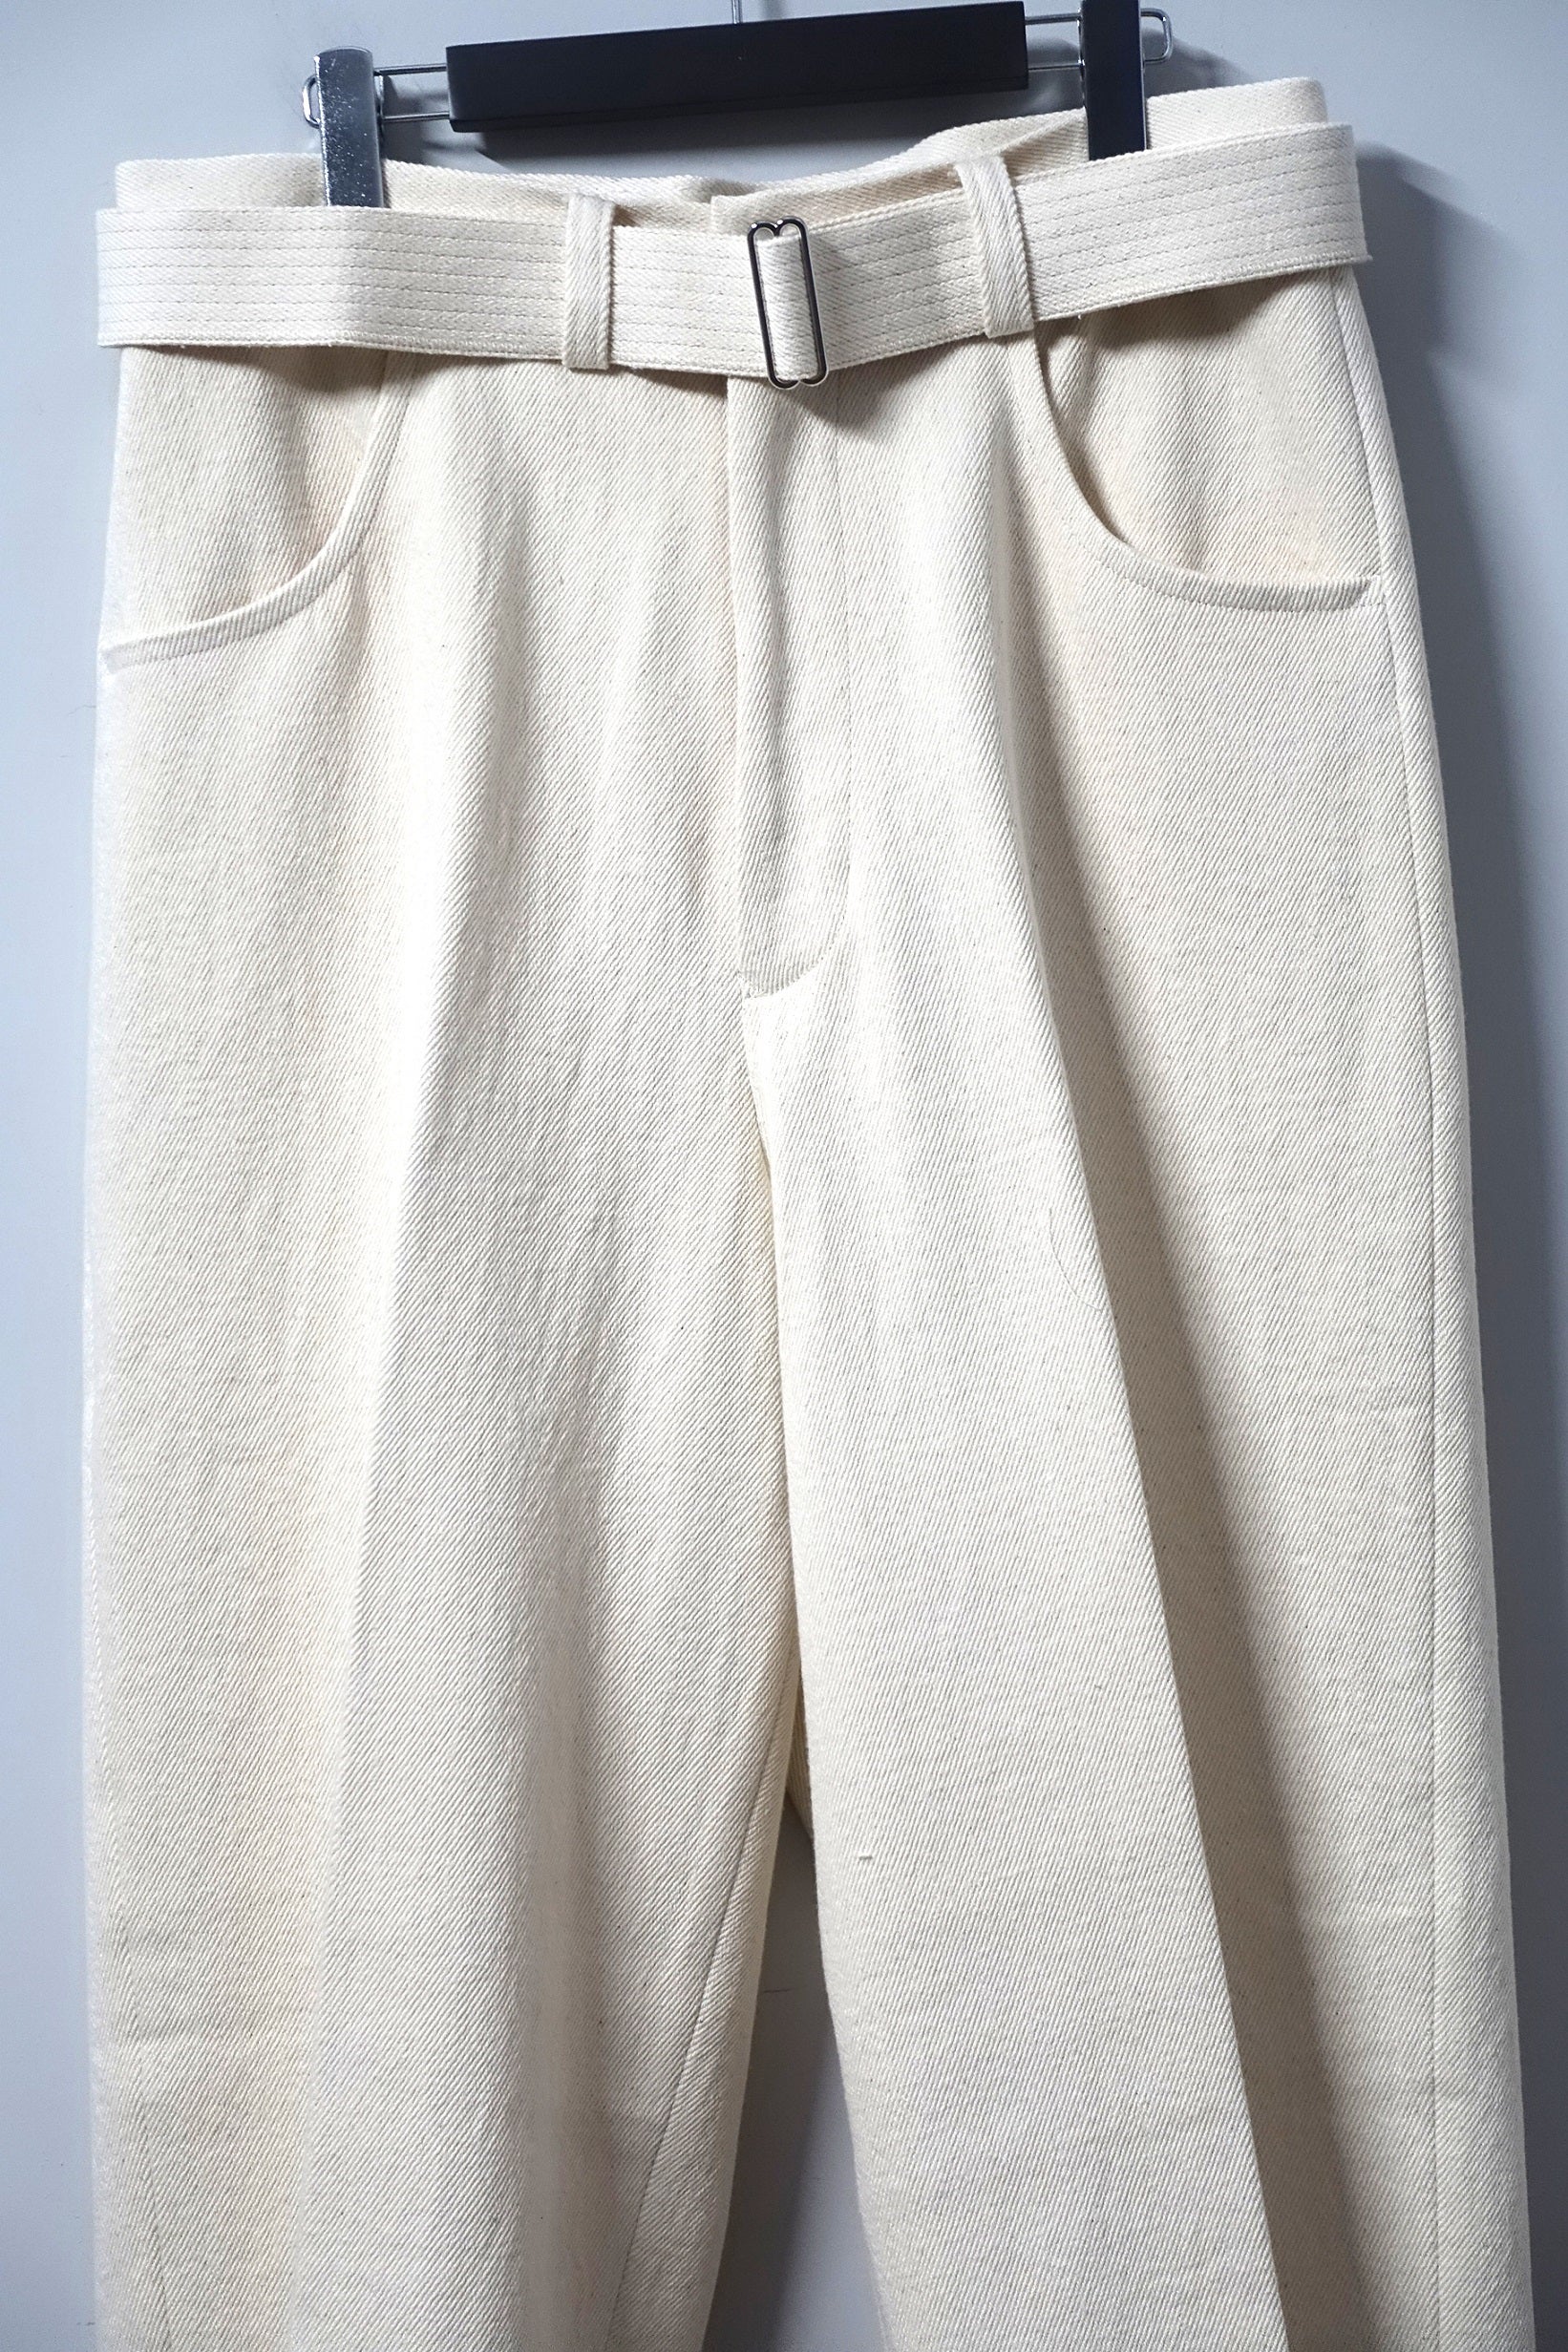 URU(ウル)/BELTED PANTS/Ivory 通販 取り扱い-CONCRETE RIVER